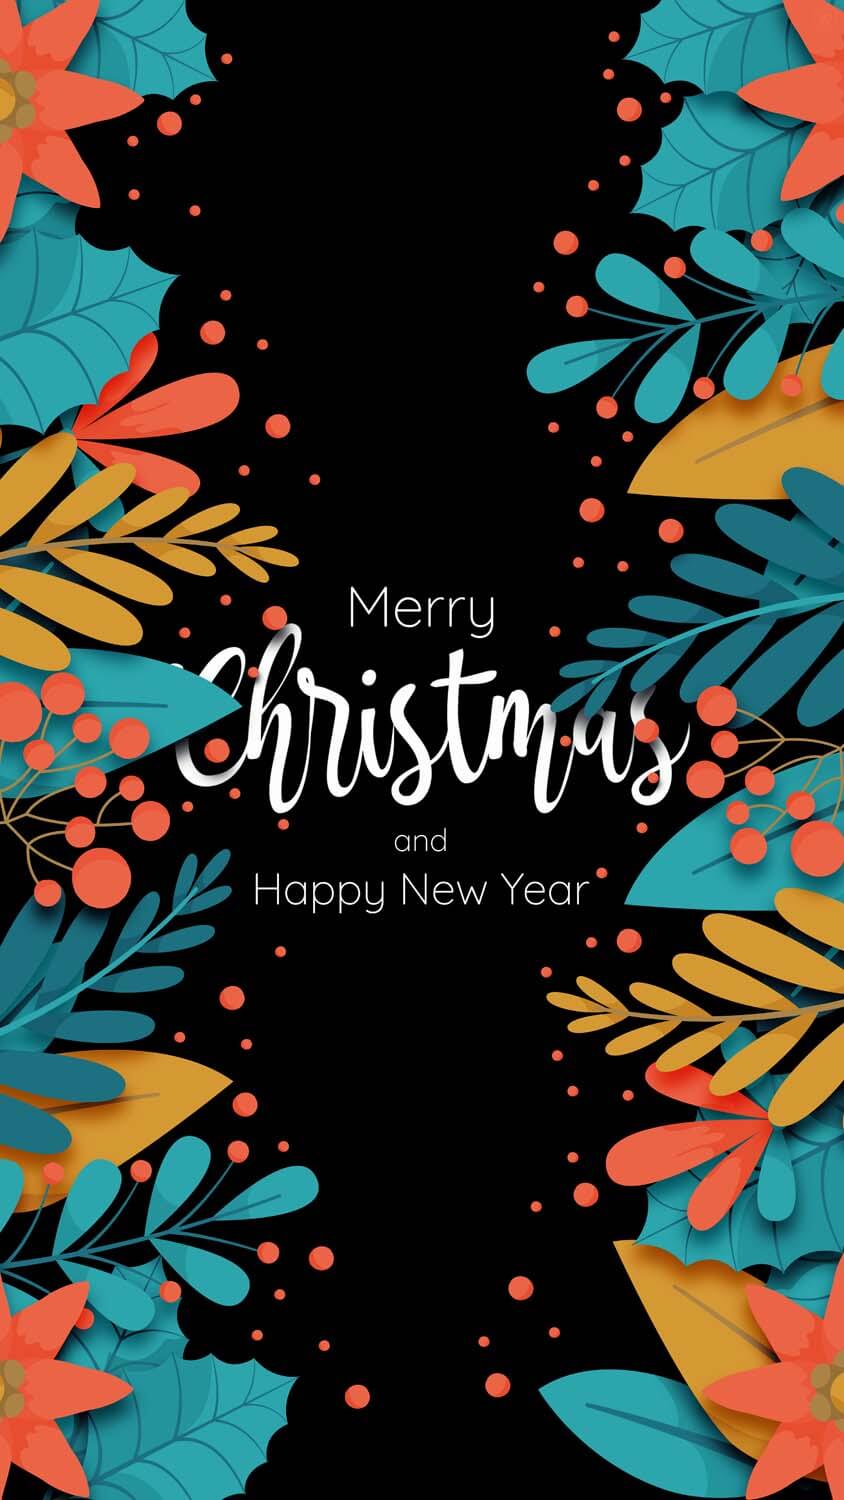 Merry Christmas and Happy New Year iPhone Wallpaper HD